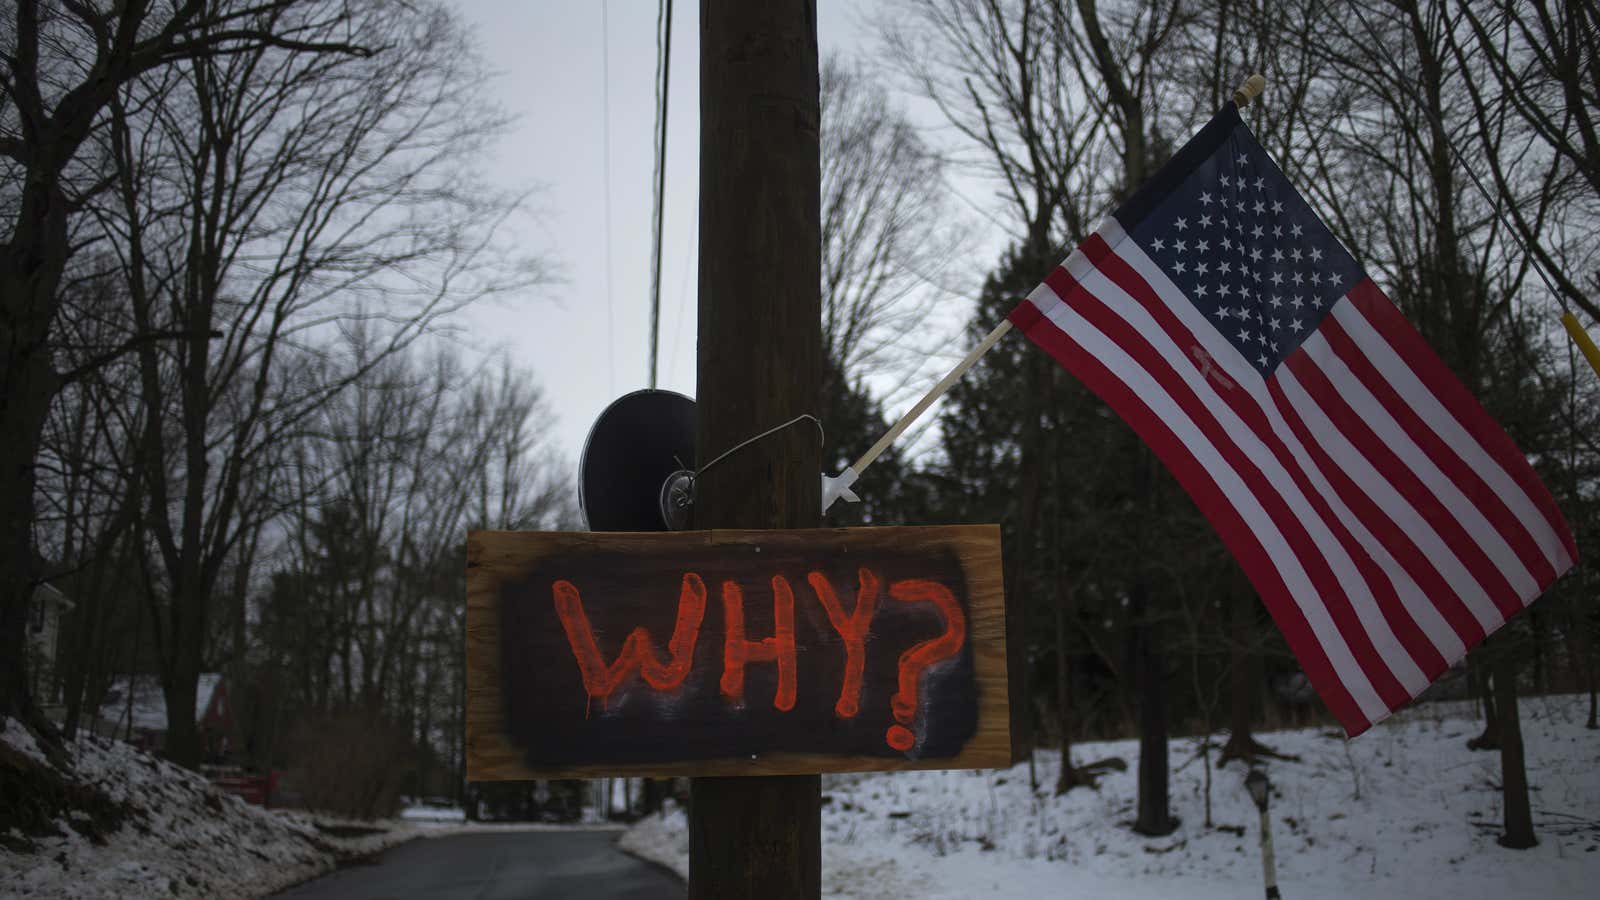 A sign posted on an electricity pole outside a house near Sandy Hook Elementary School.